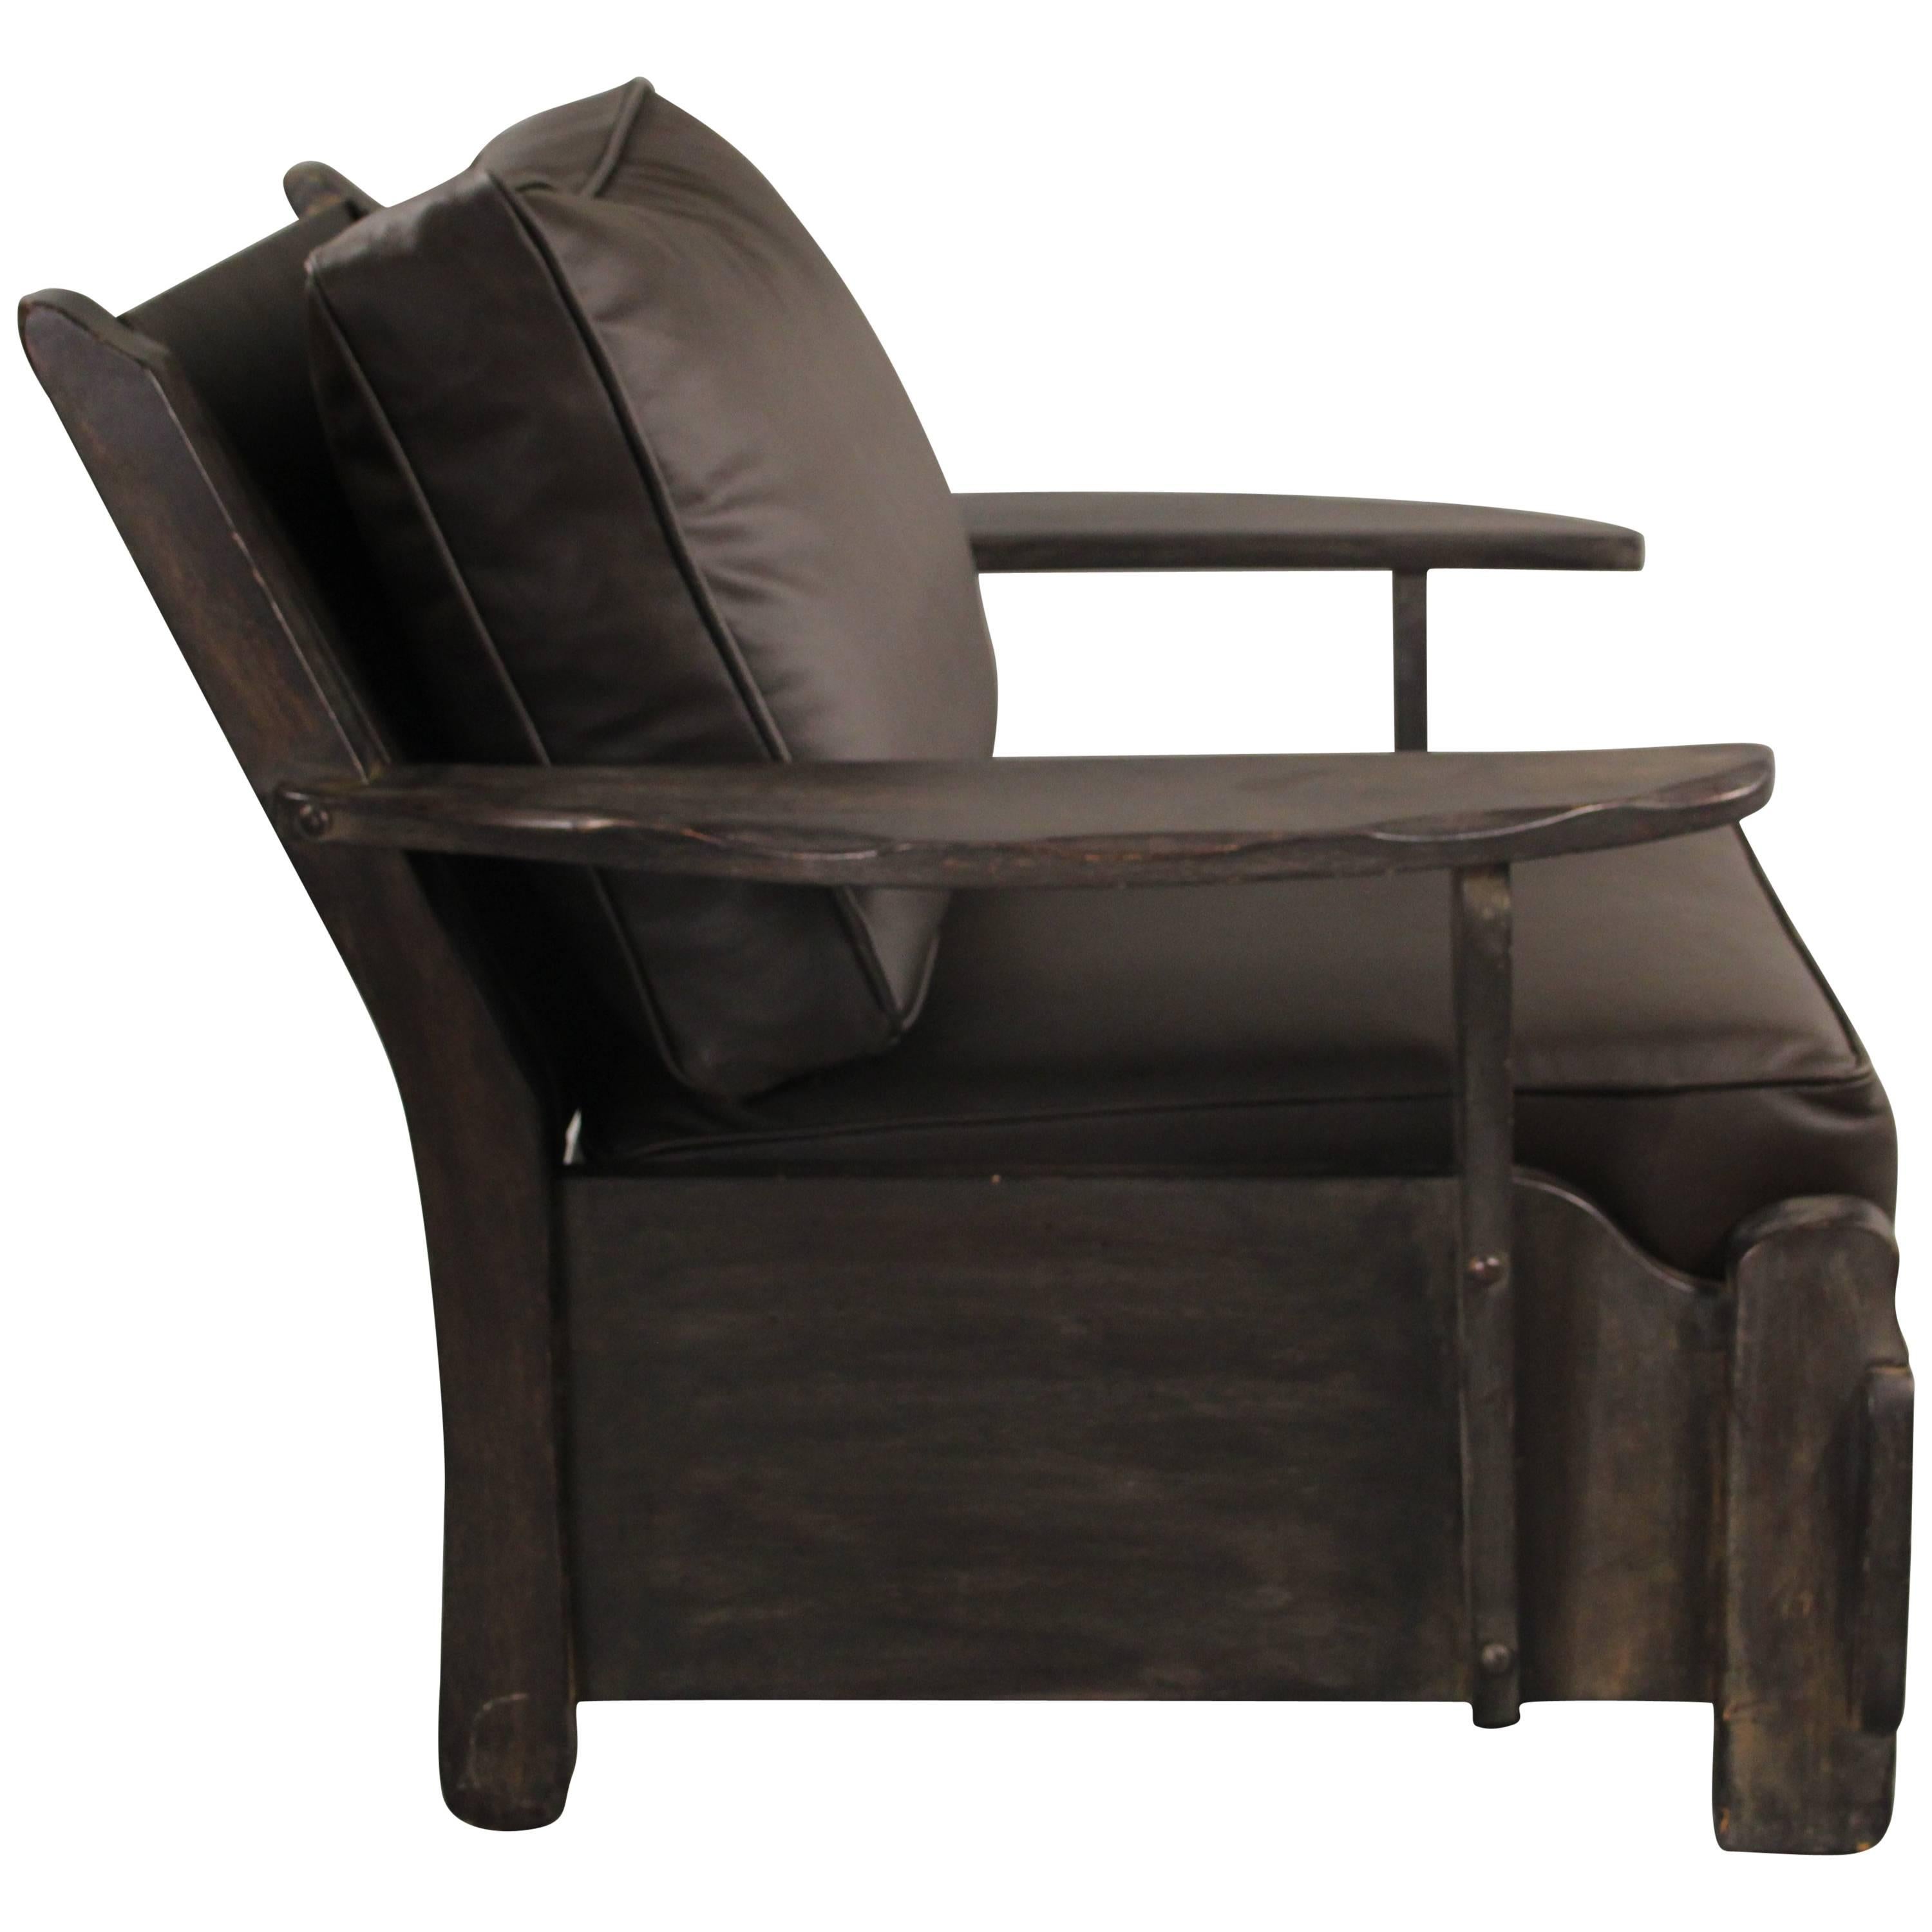 Antique Rancho Monterey Period Armchair with New Leather Upholstery, circa 1930s